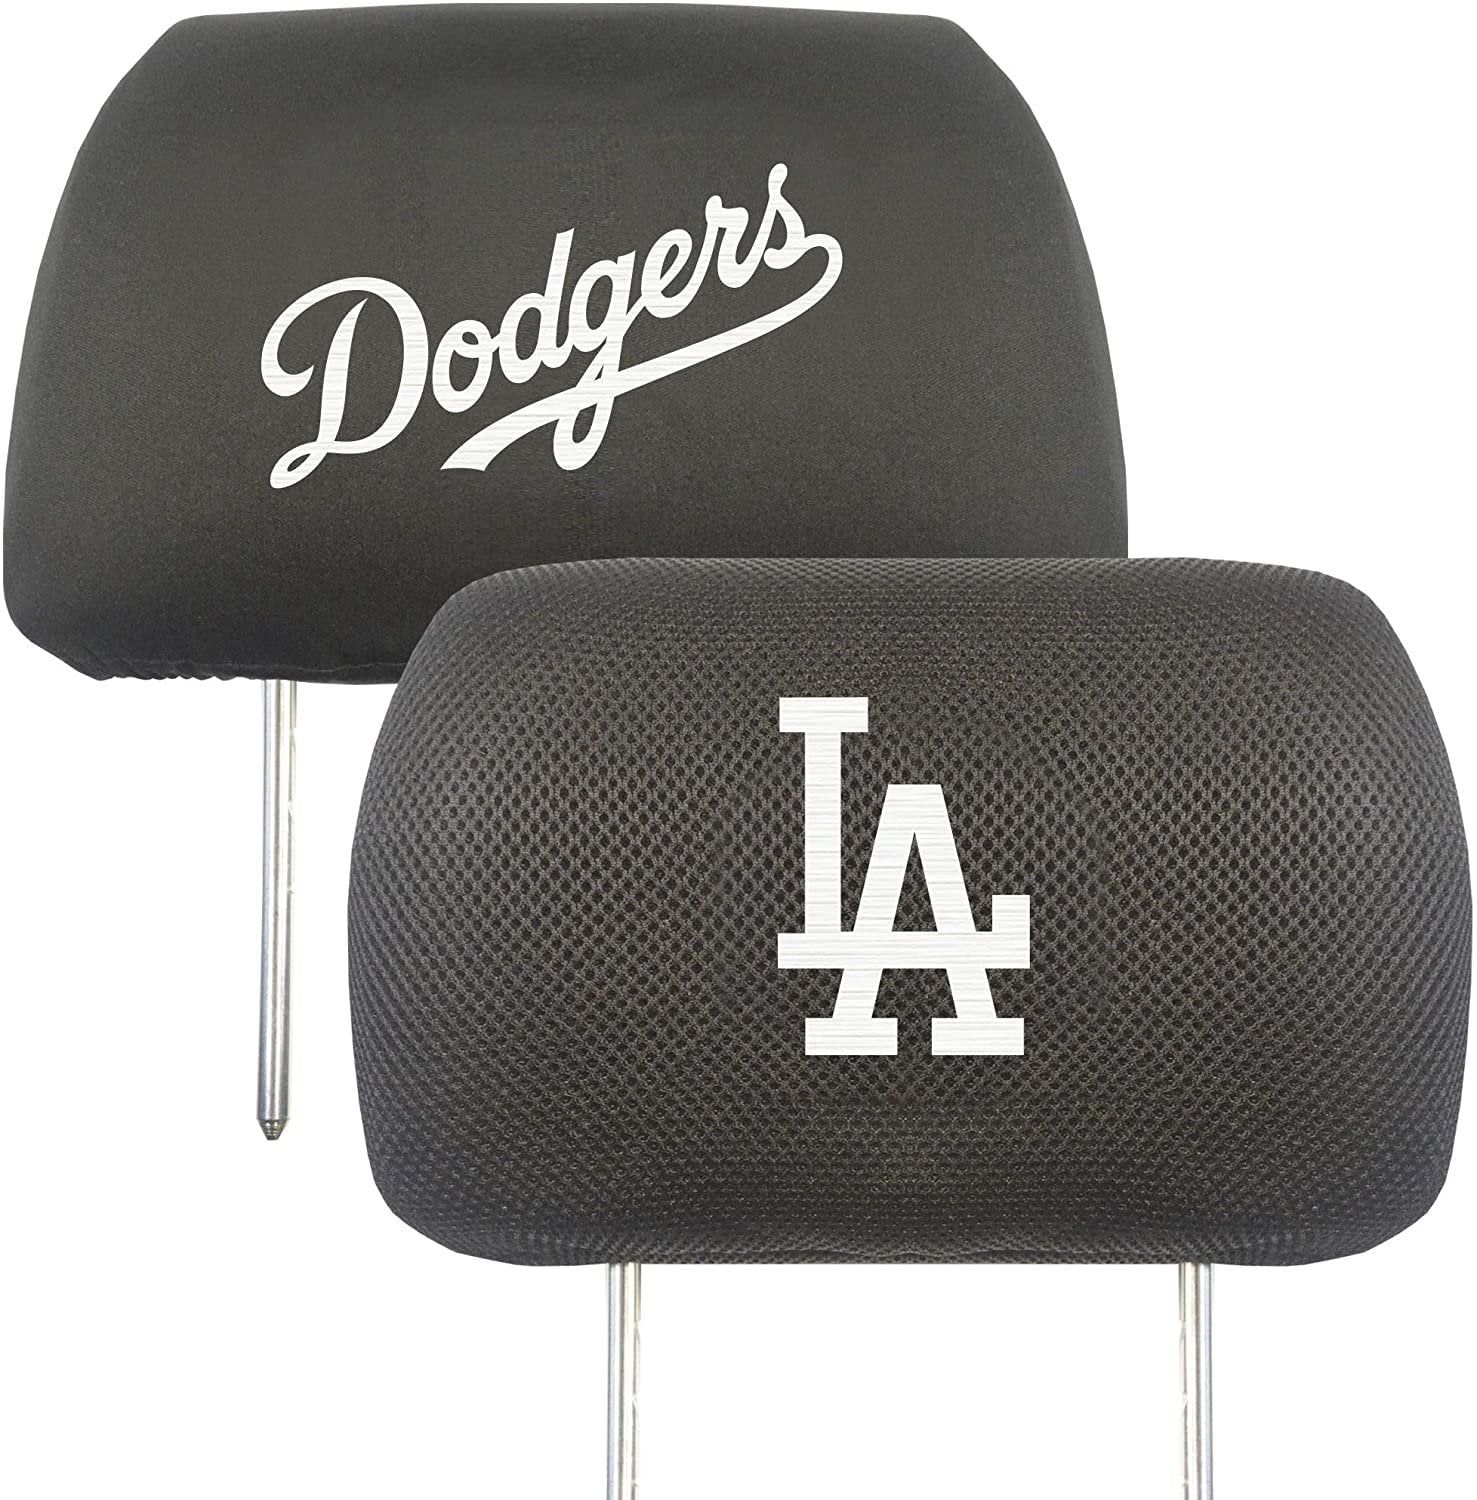 Los Angeles Dodgers Pair of Premium Auto Head Rest Covers, Embroidered, Black Elastic, 14x10 Inch